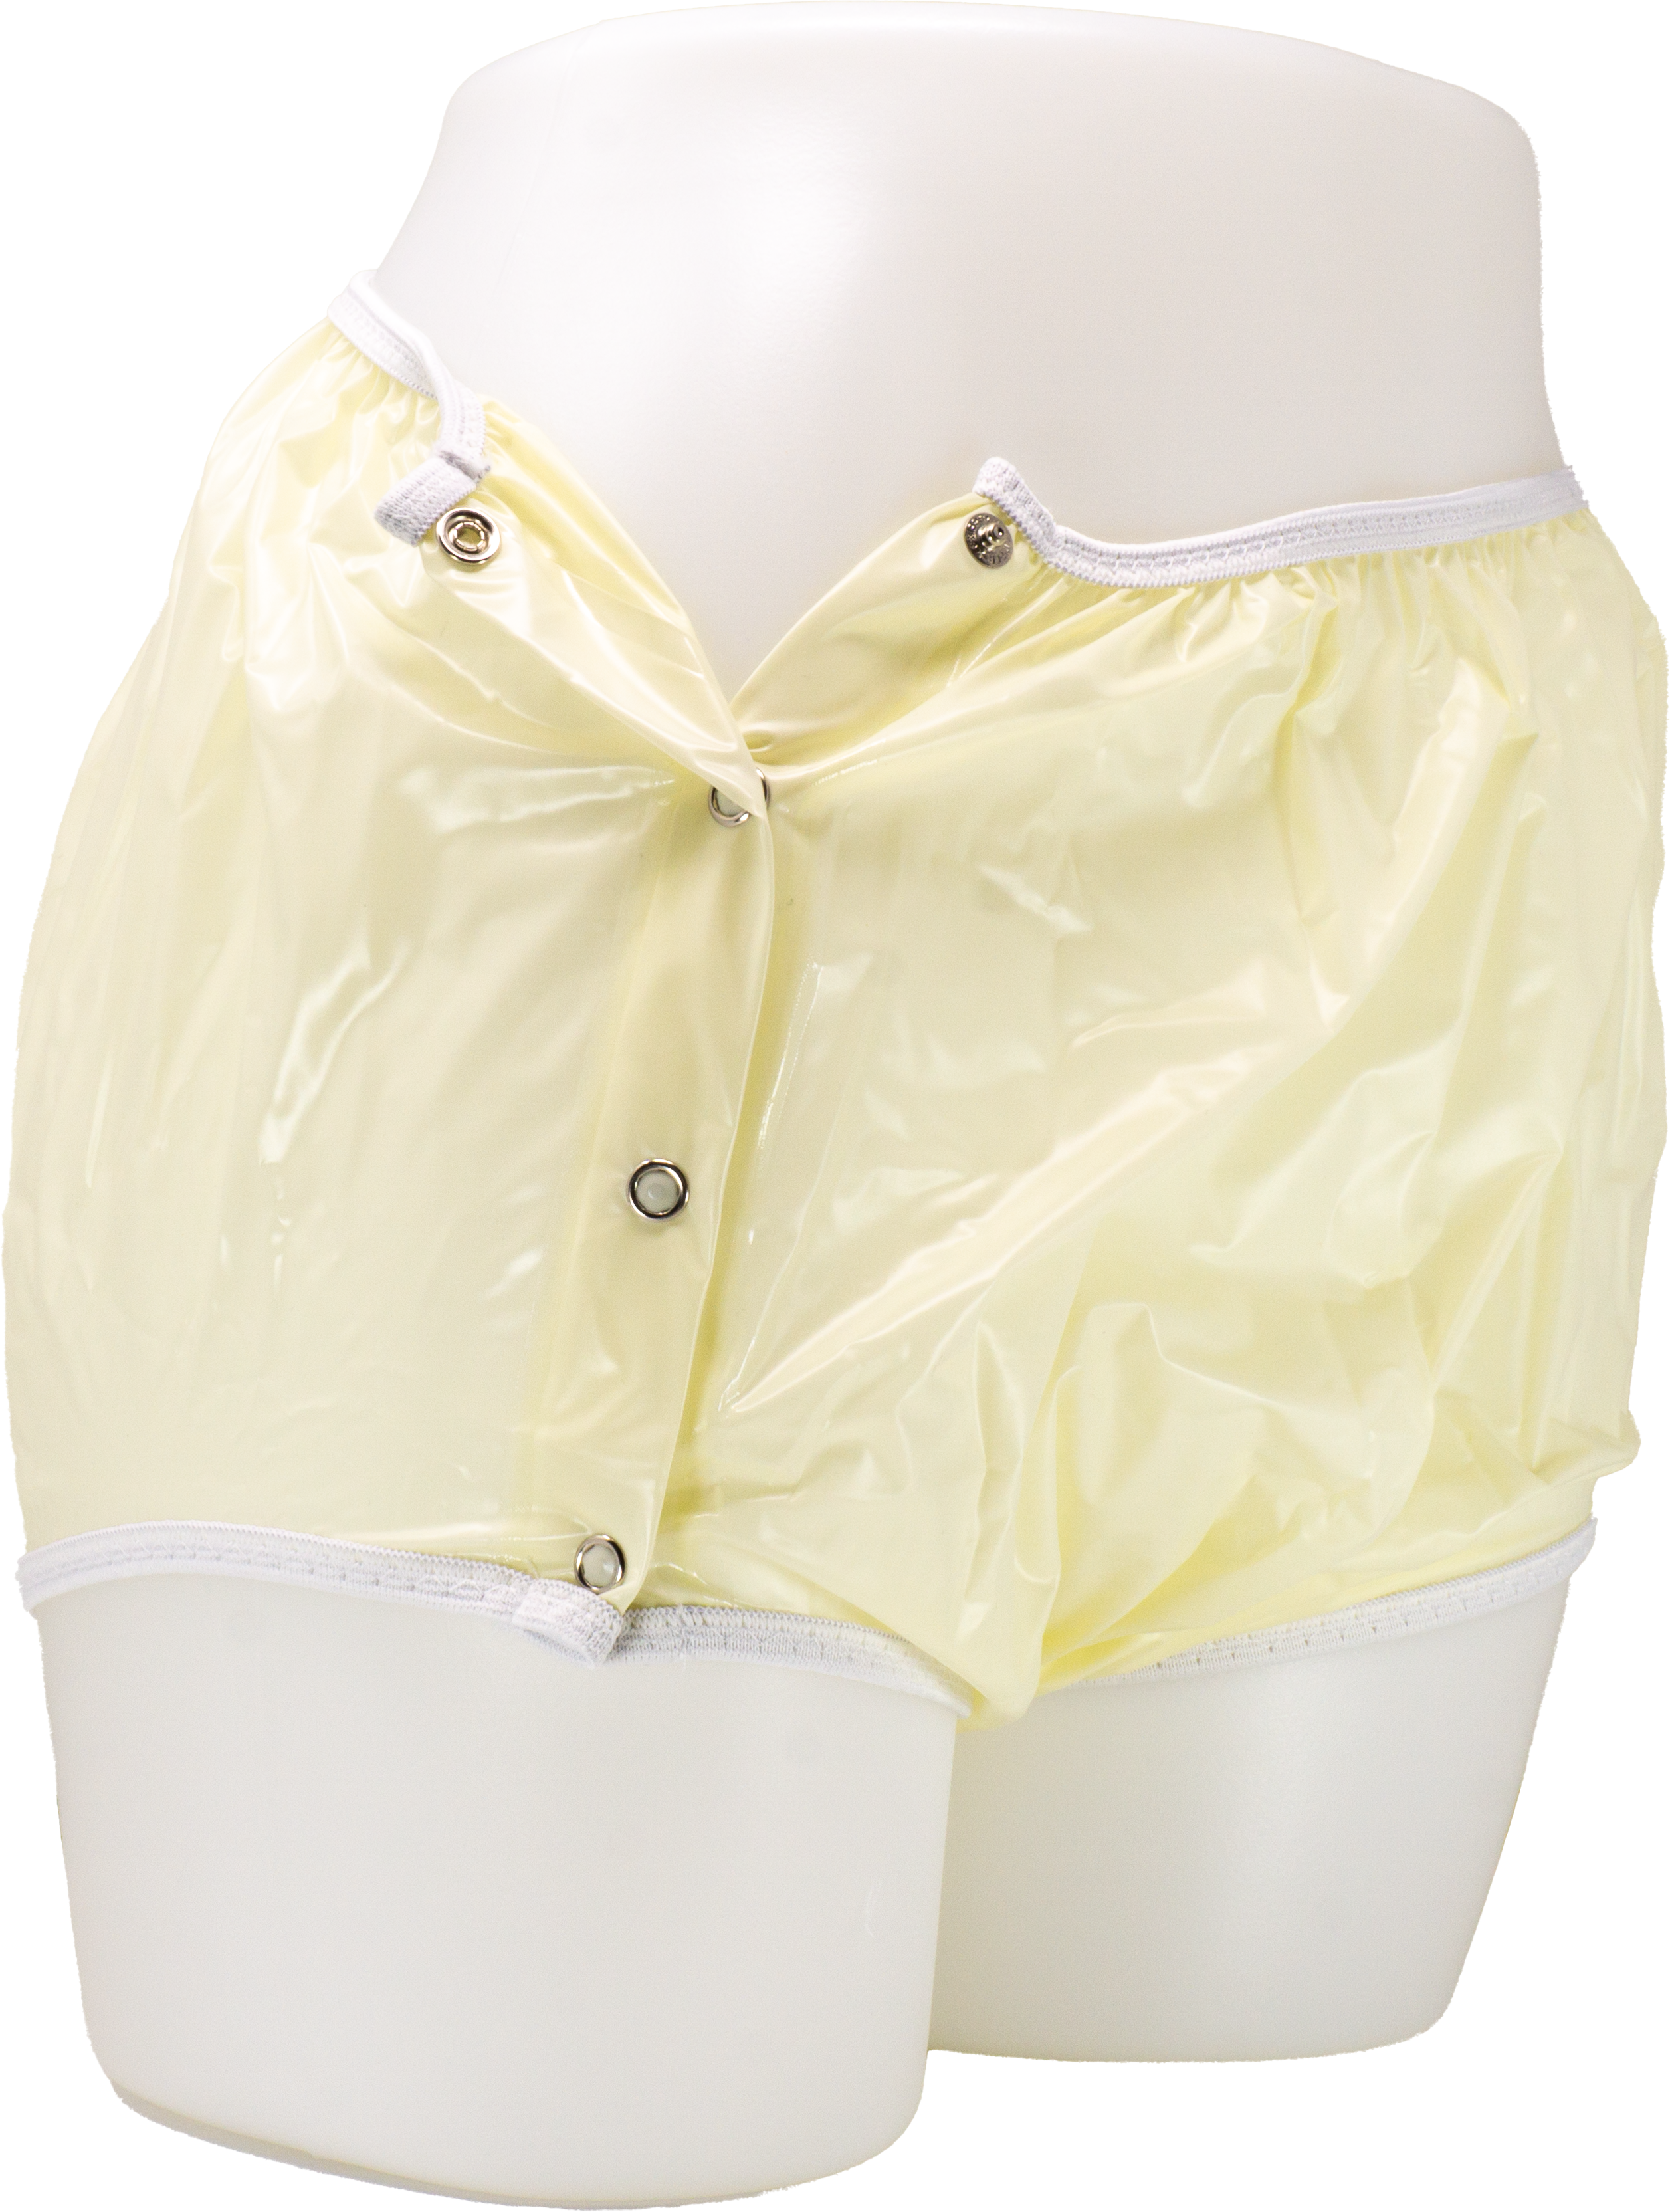 Do they make plastic pants for adults? – Protex